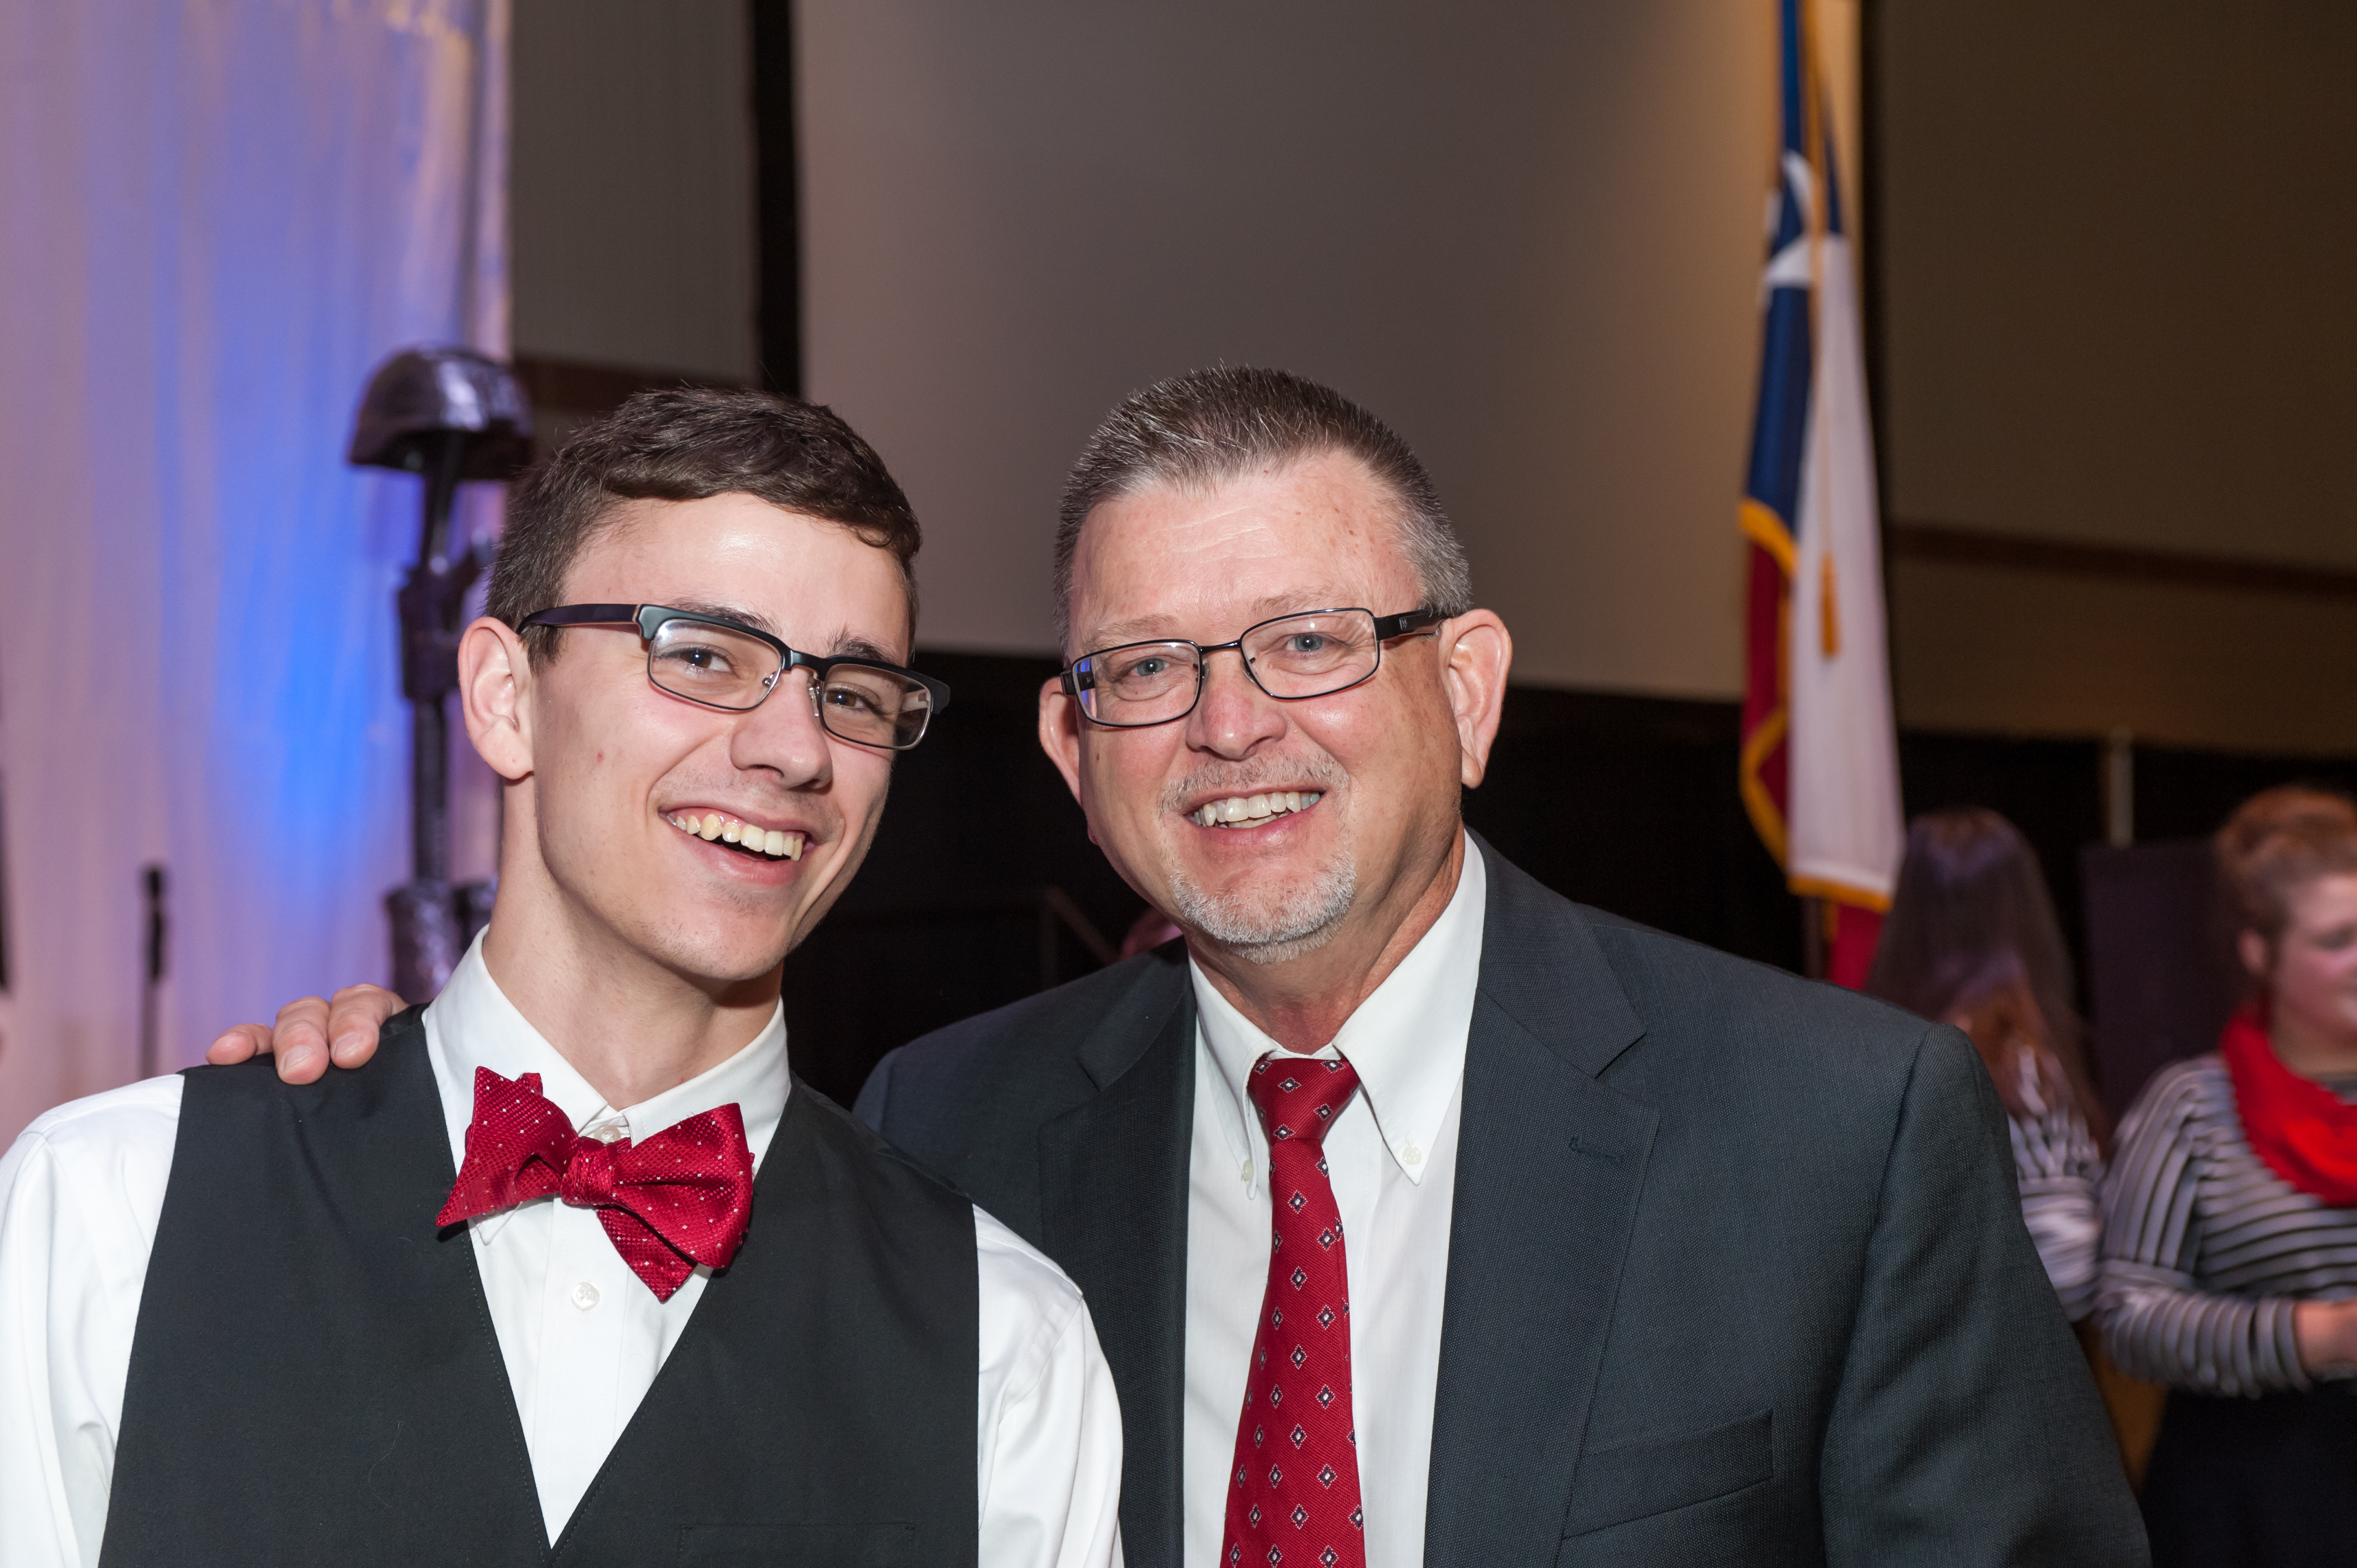 Shaie Williams for AGN Media. Brayden Williams and Billy Talley at the Armed Forces Day Banquet  in Amarillo, TX Held at the Amarillo Civic Center on May 21, 2016.